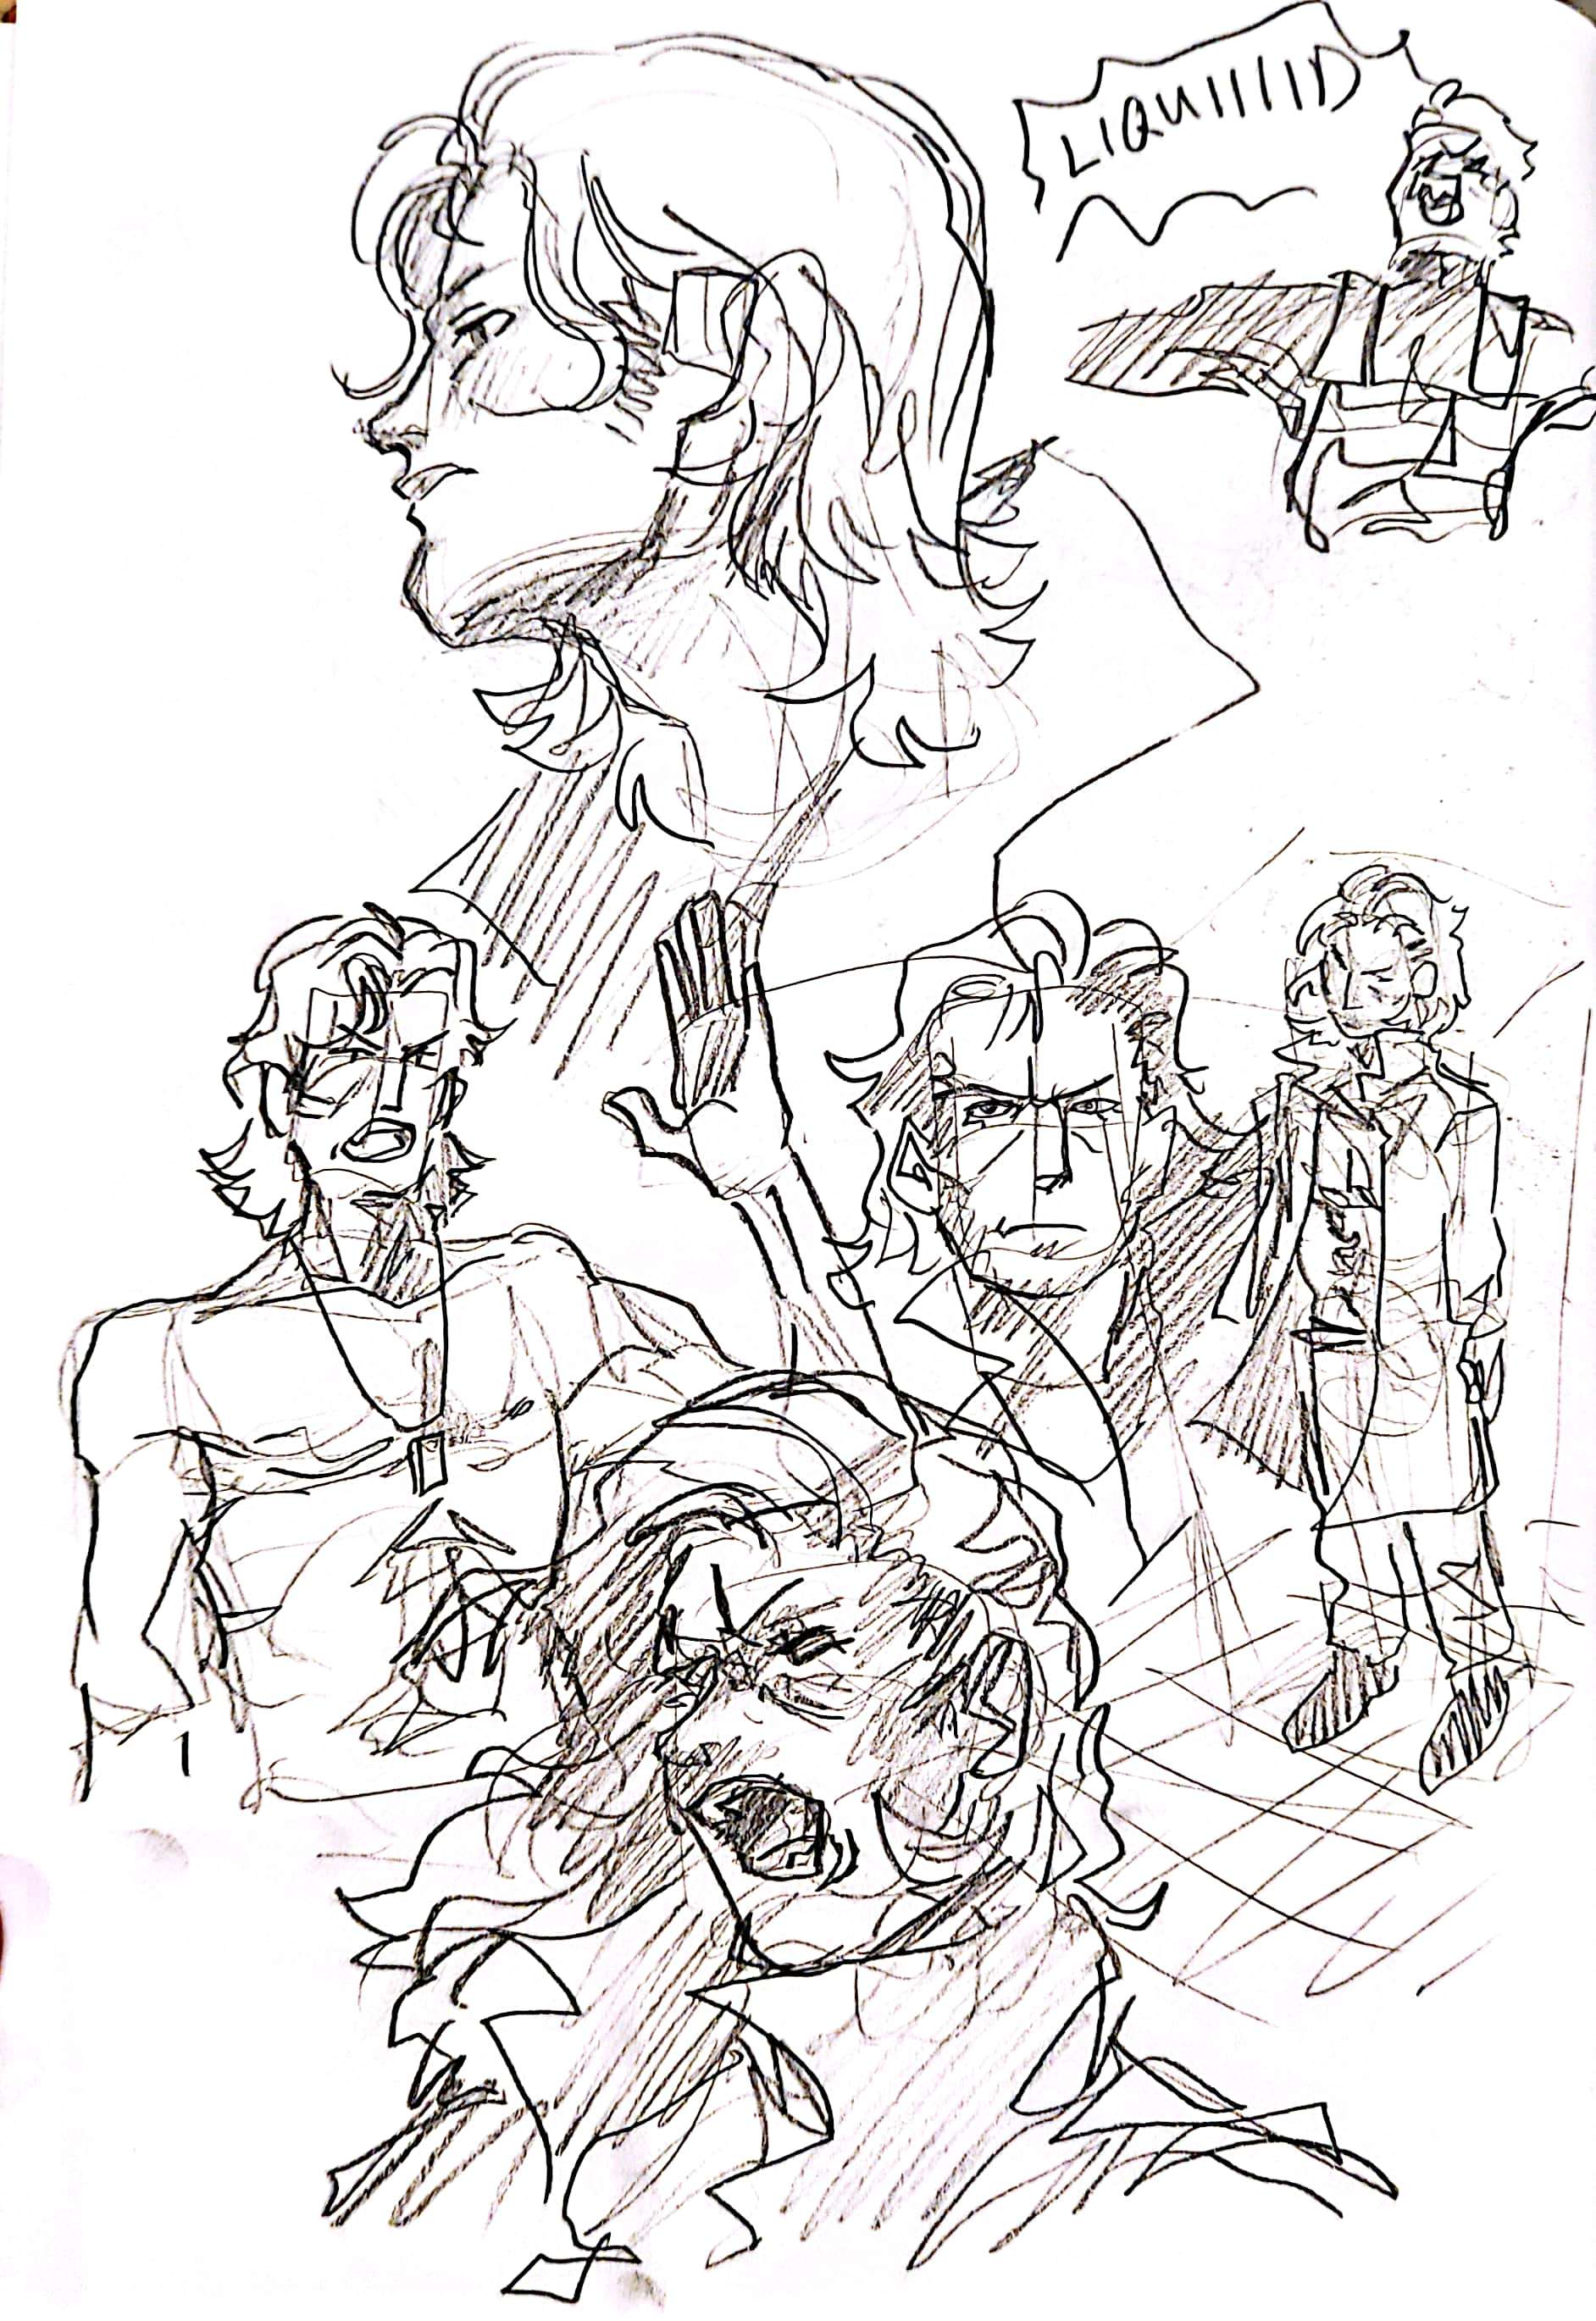 A page full of Liquid Snake sketches